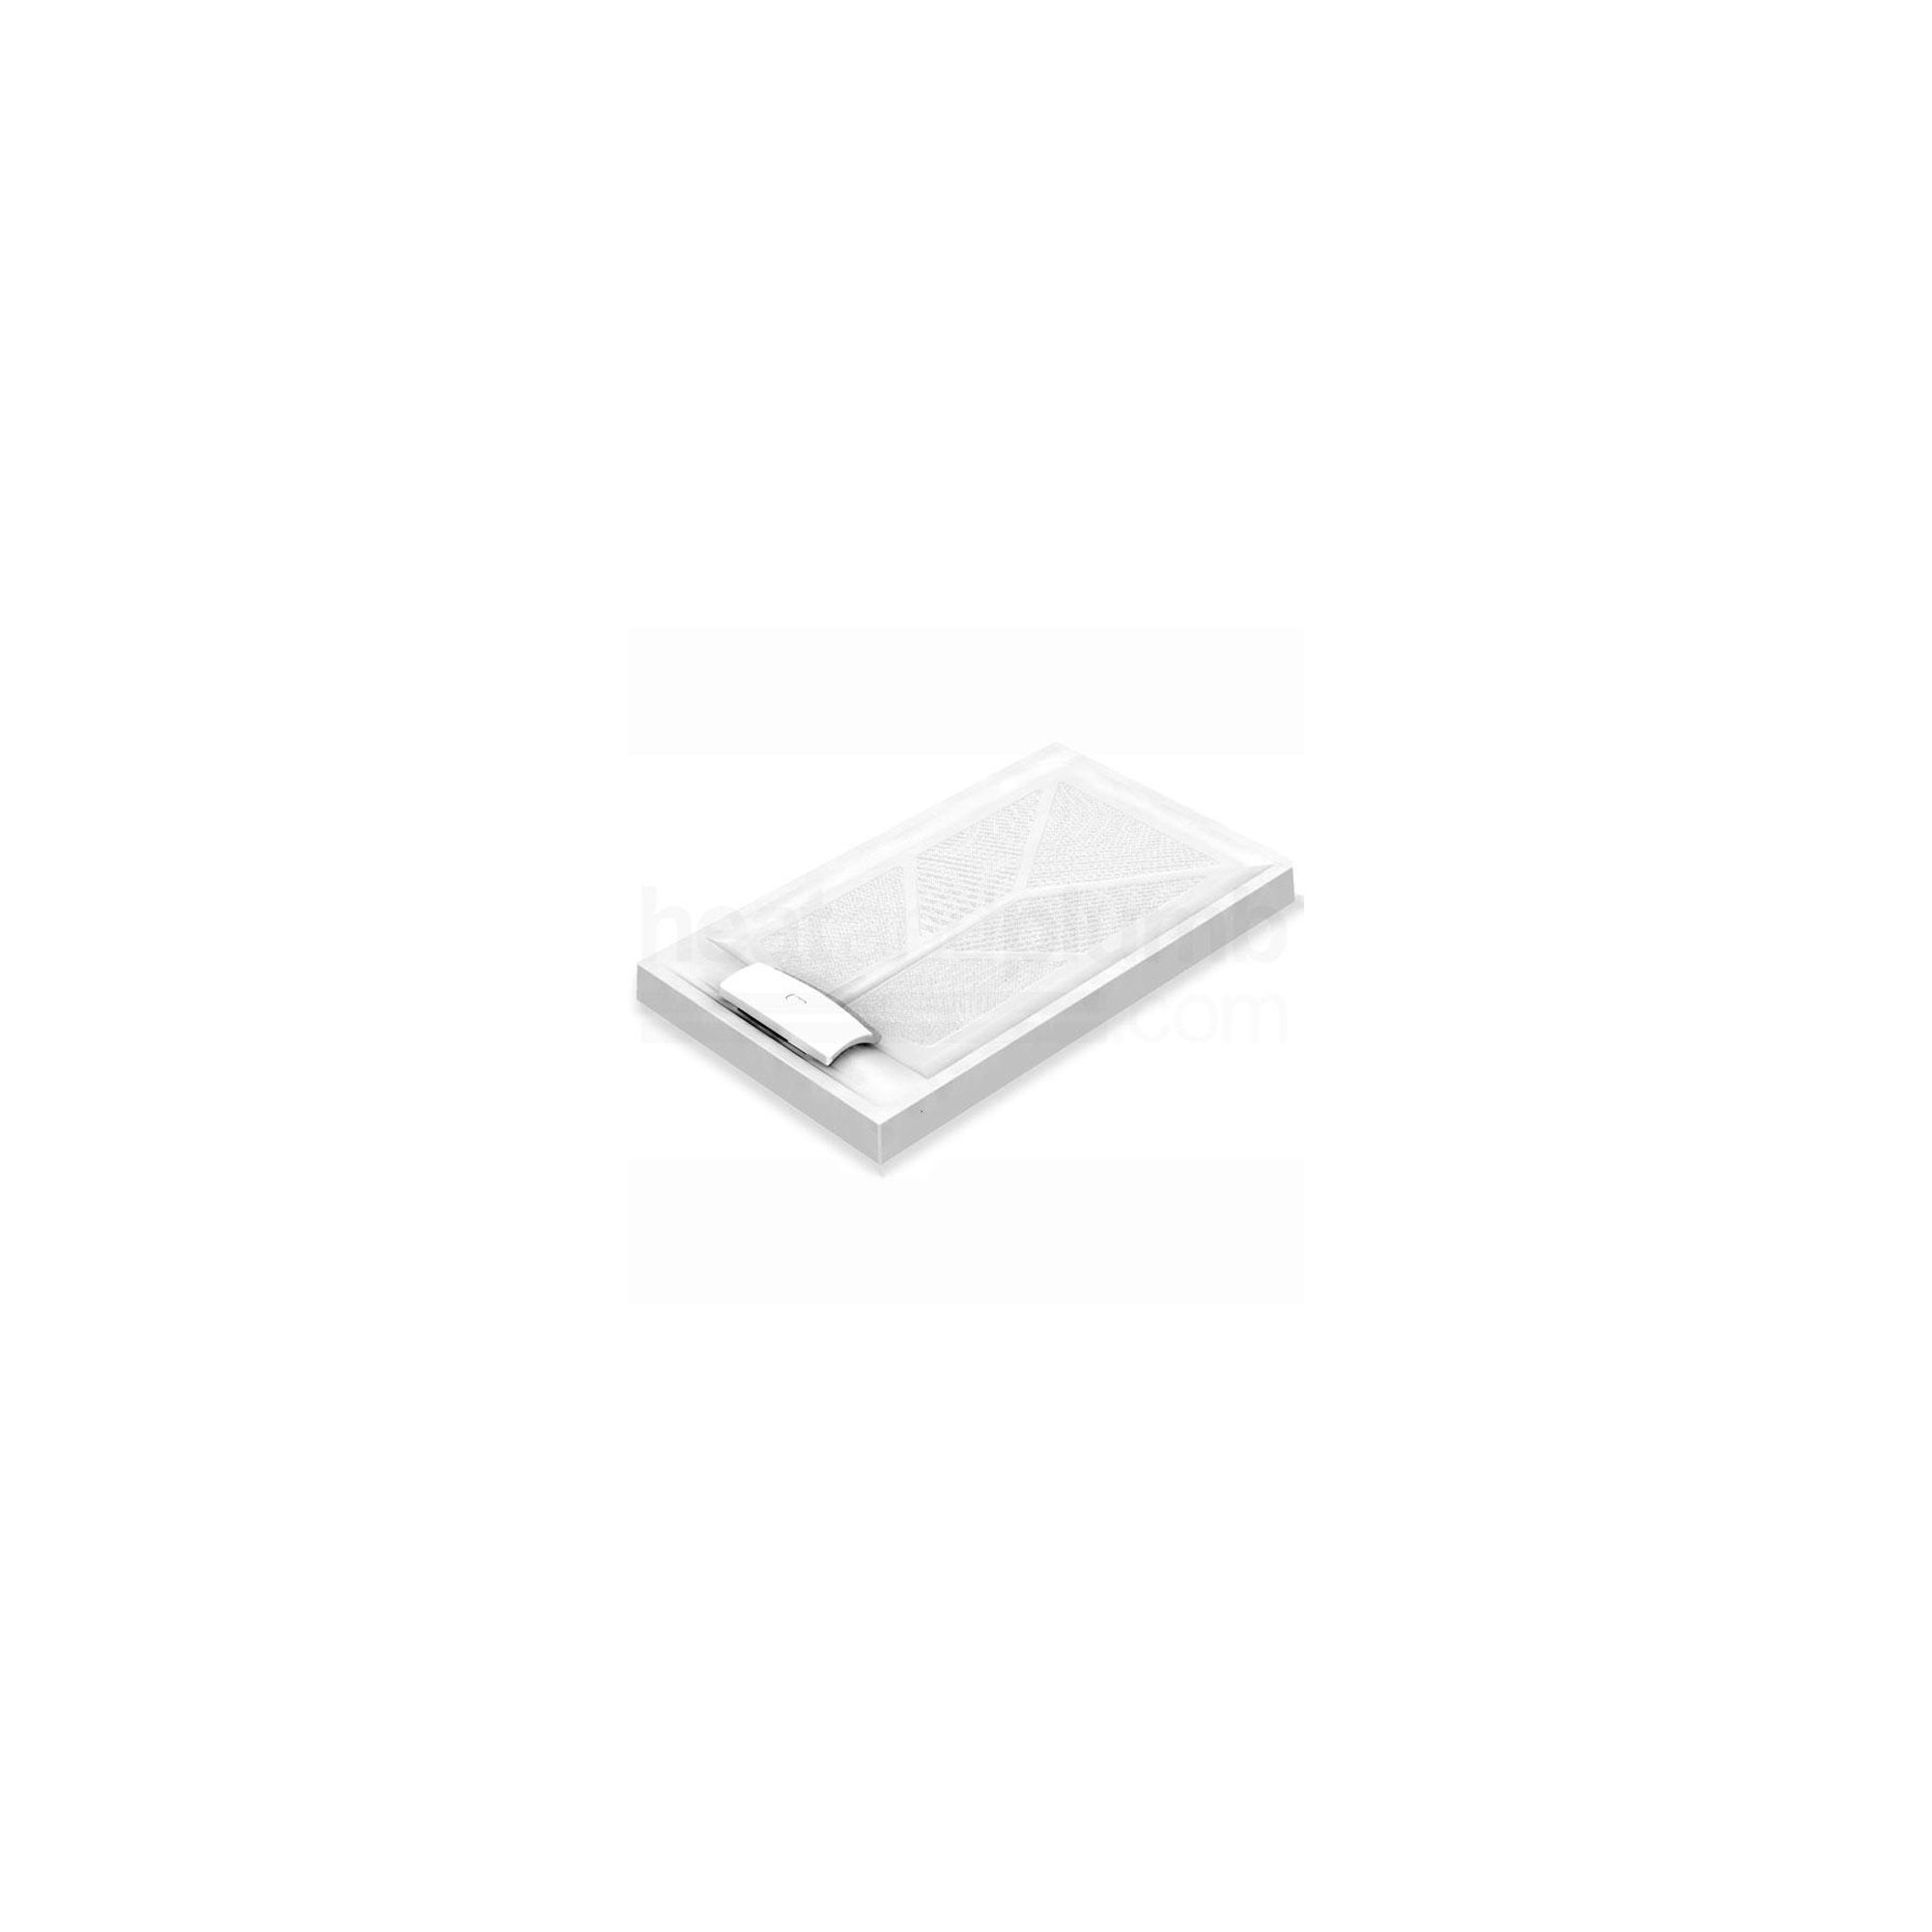 AKW Sulby Rectangular Shower Tray 1800mm x 820mm at Tesco Direct